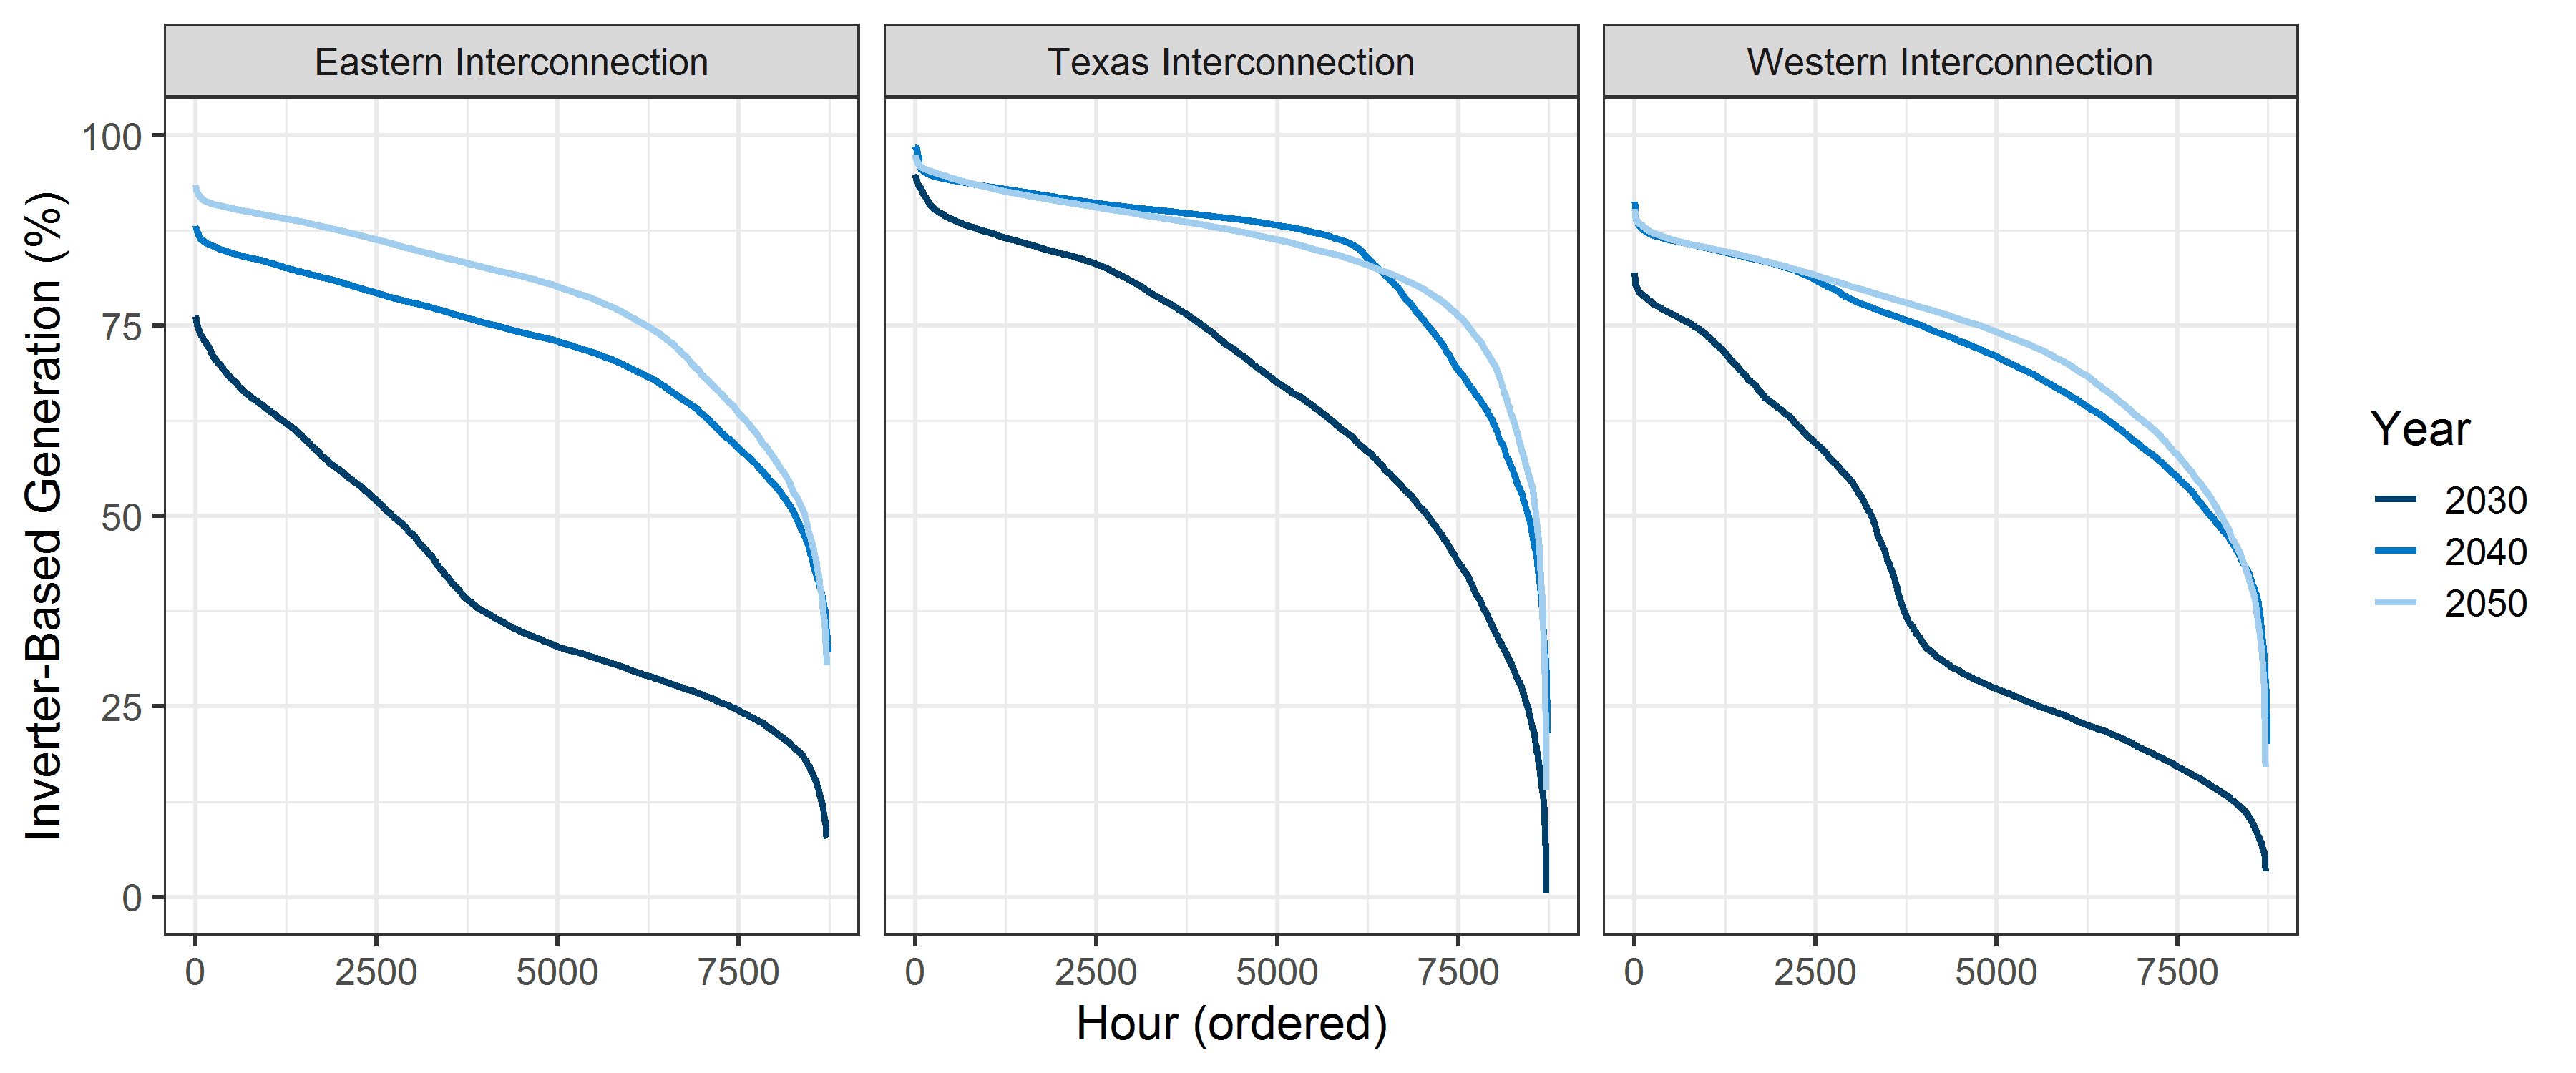 Three graphs showing inverter-based generation for Eastern, Texas, and Wester interconnections